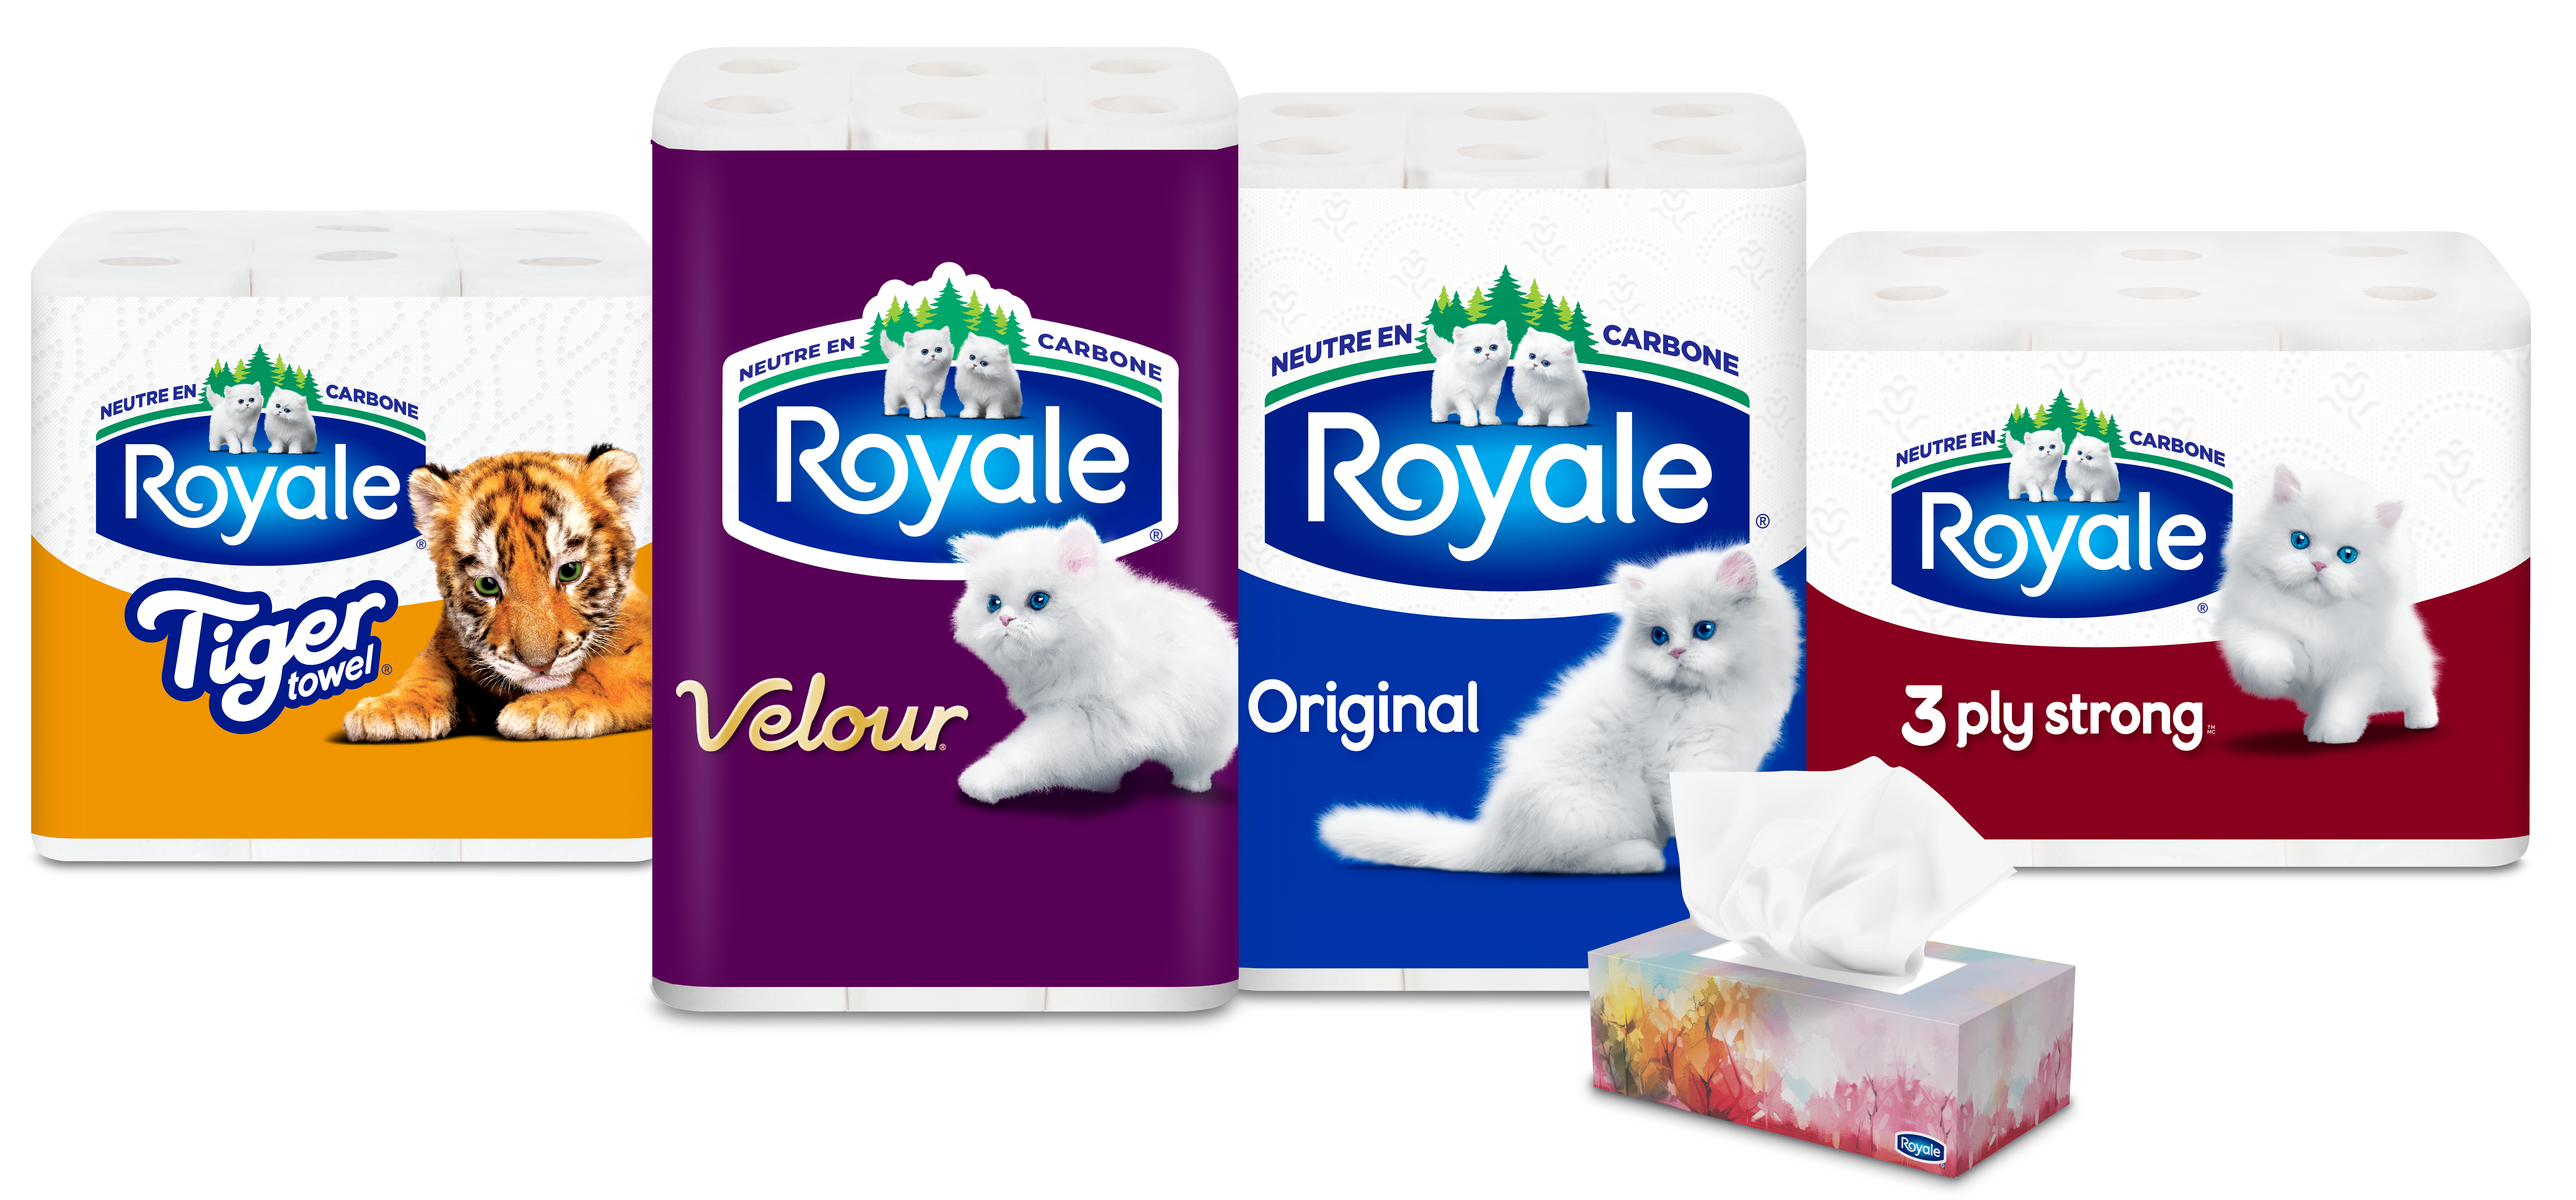 Royale product pack